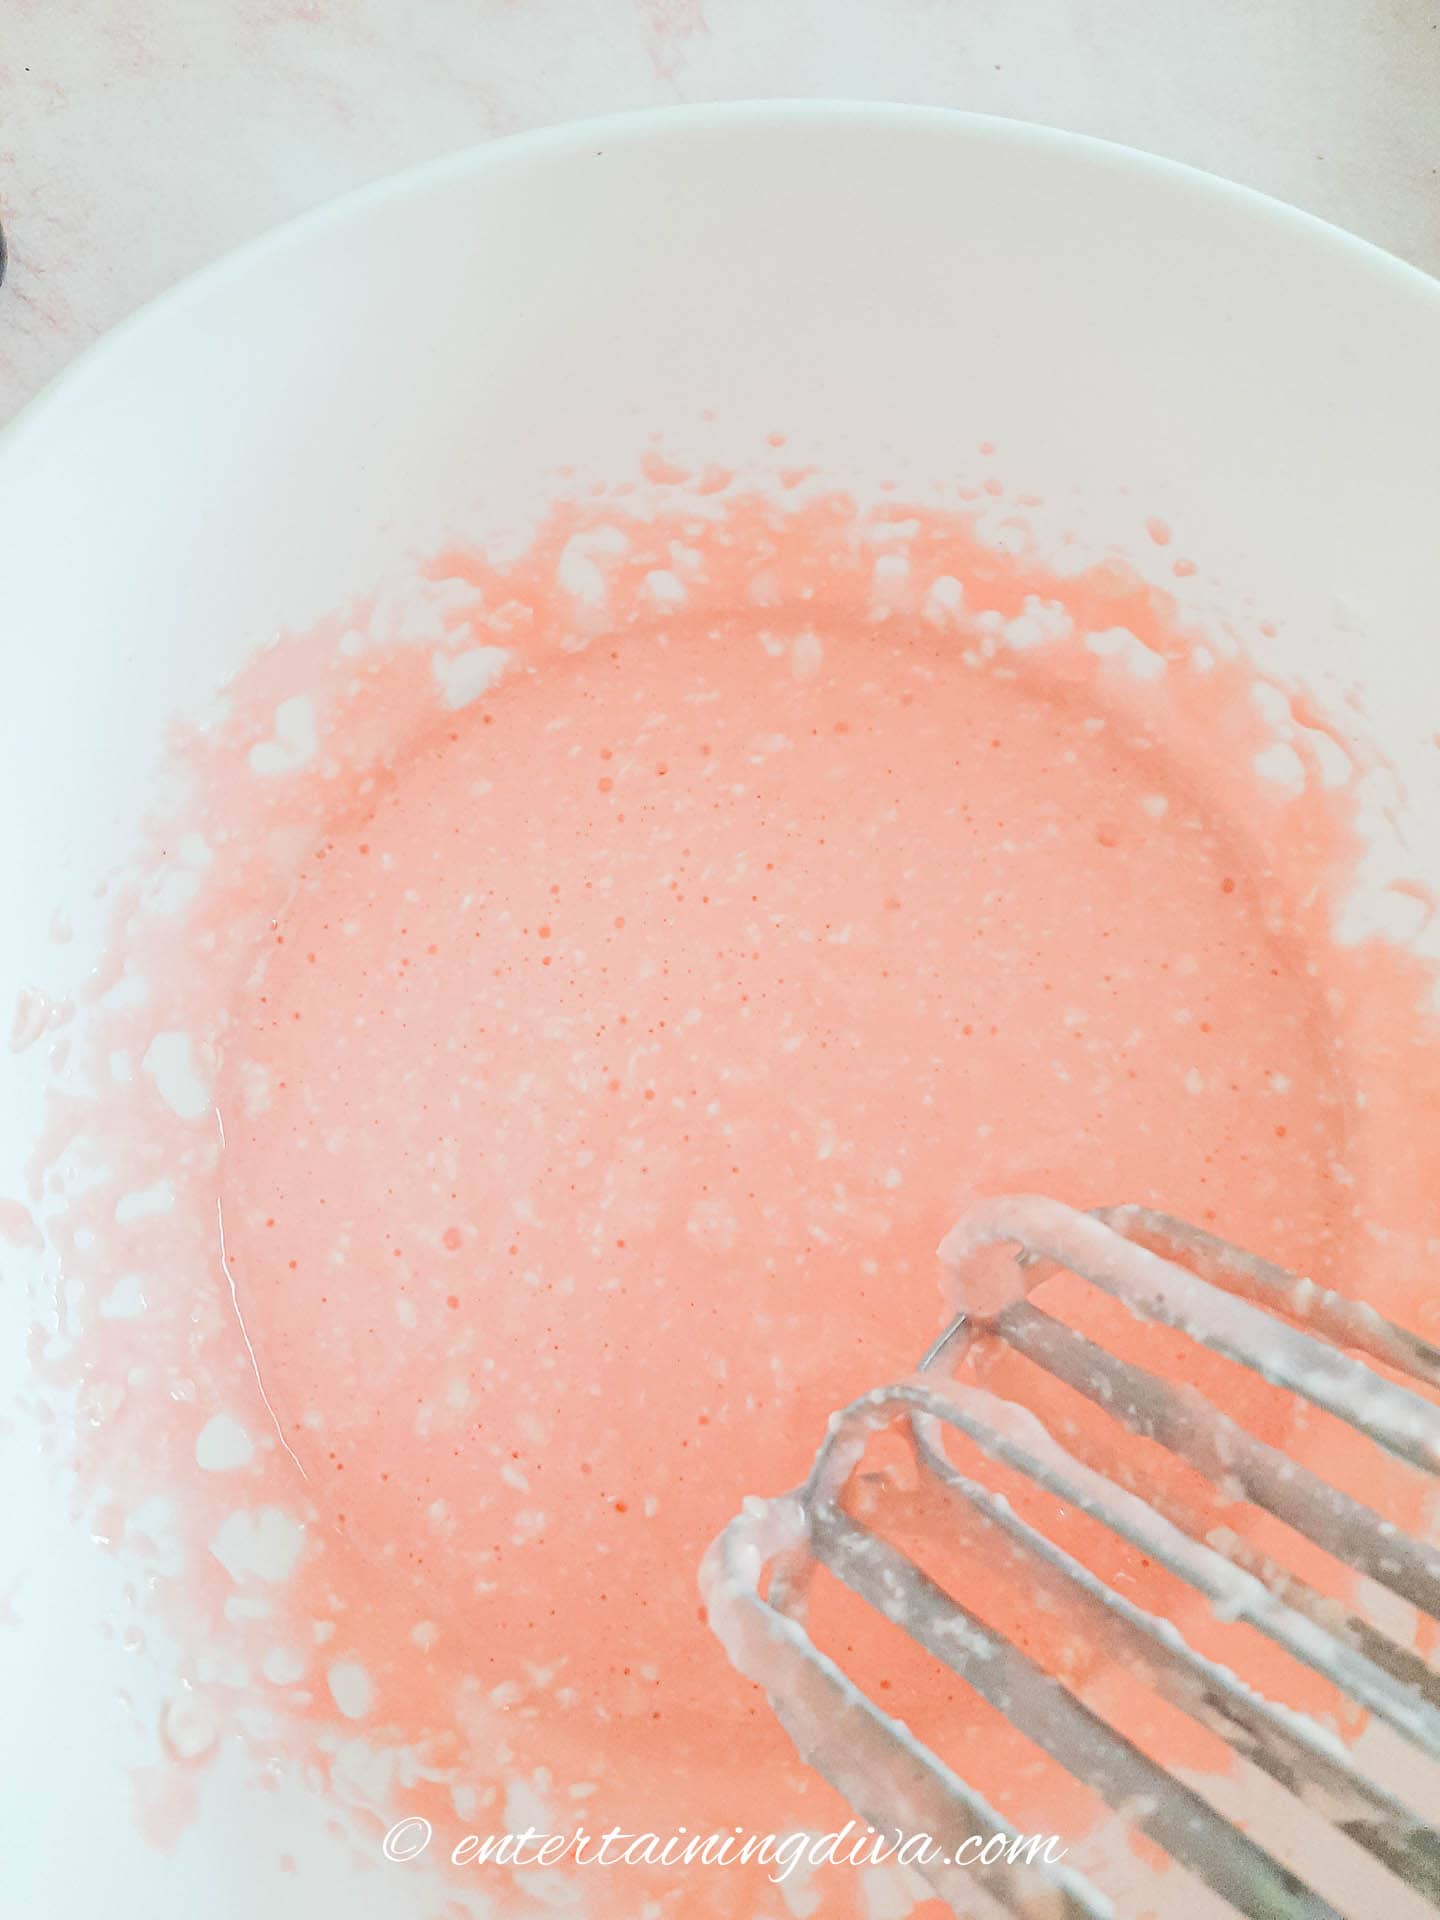 The peppermint cheesecake batter in a bowl